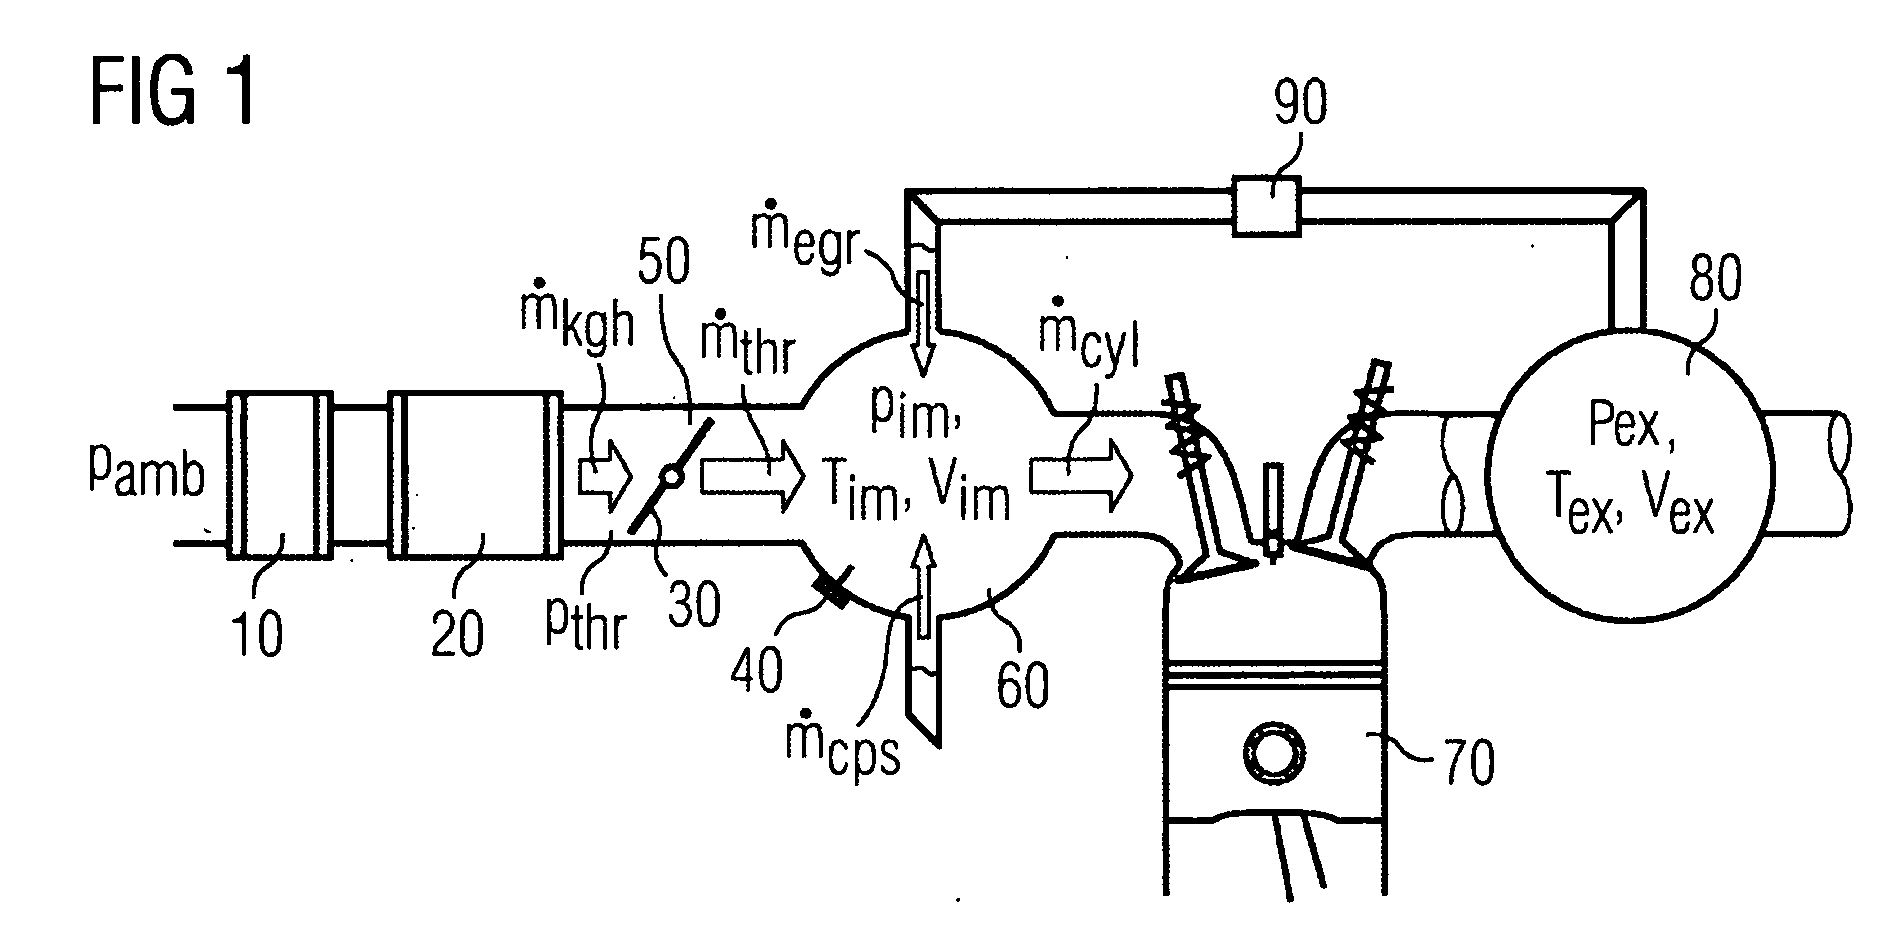 Method For Detecting The Ambient Pressure In An Internal Combustion Engine